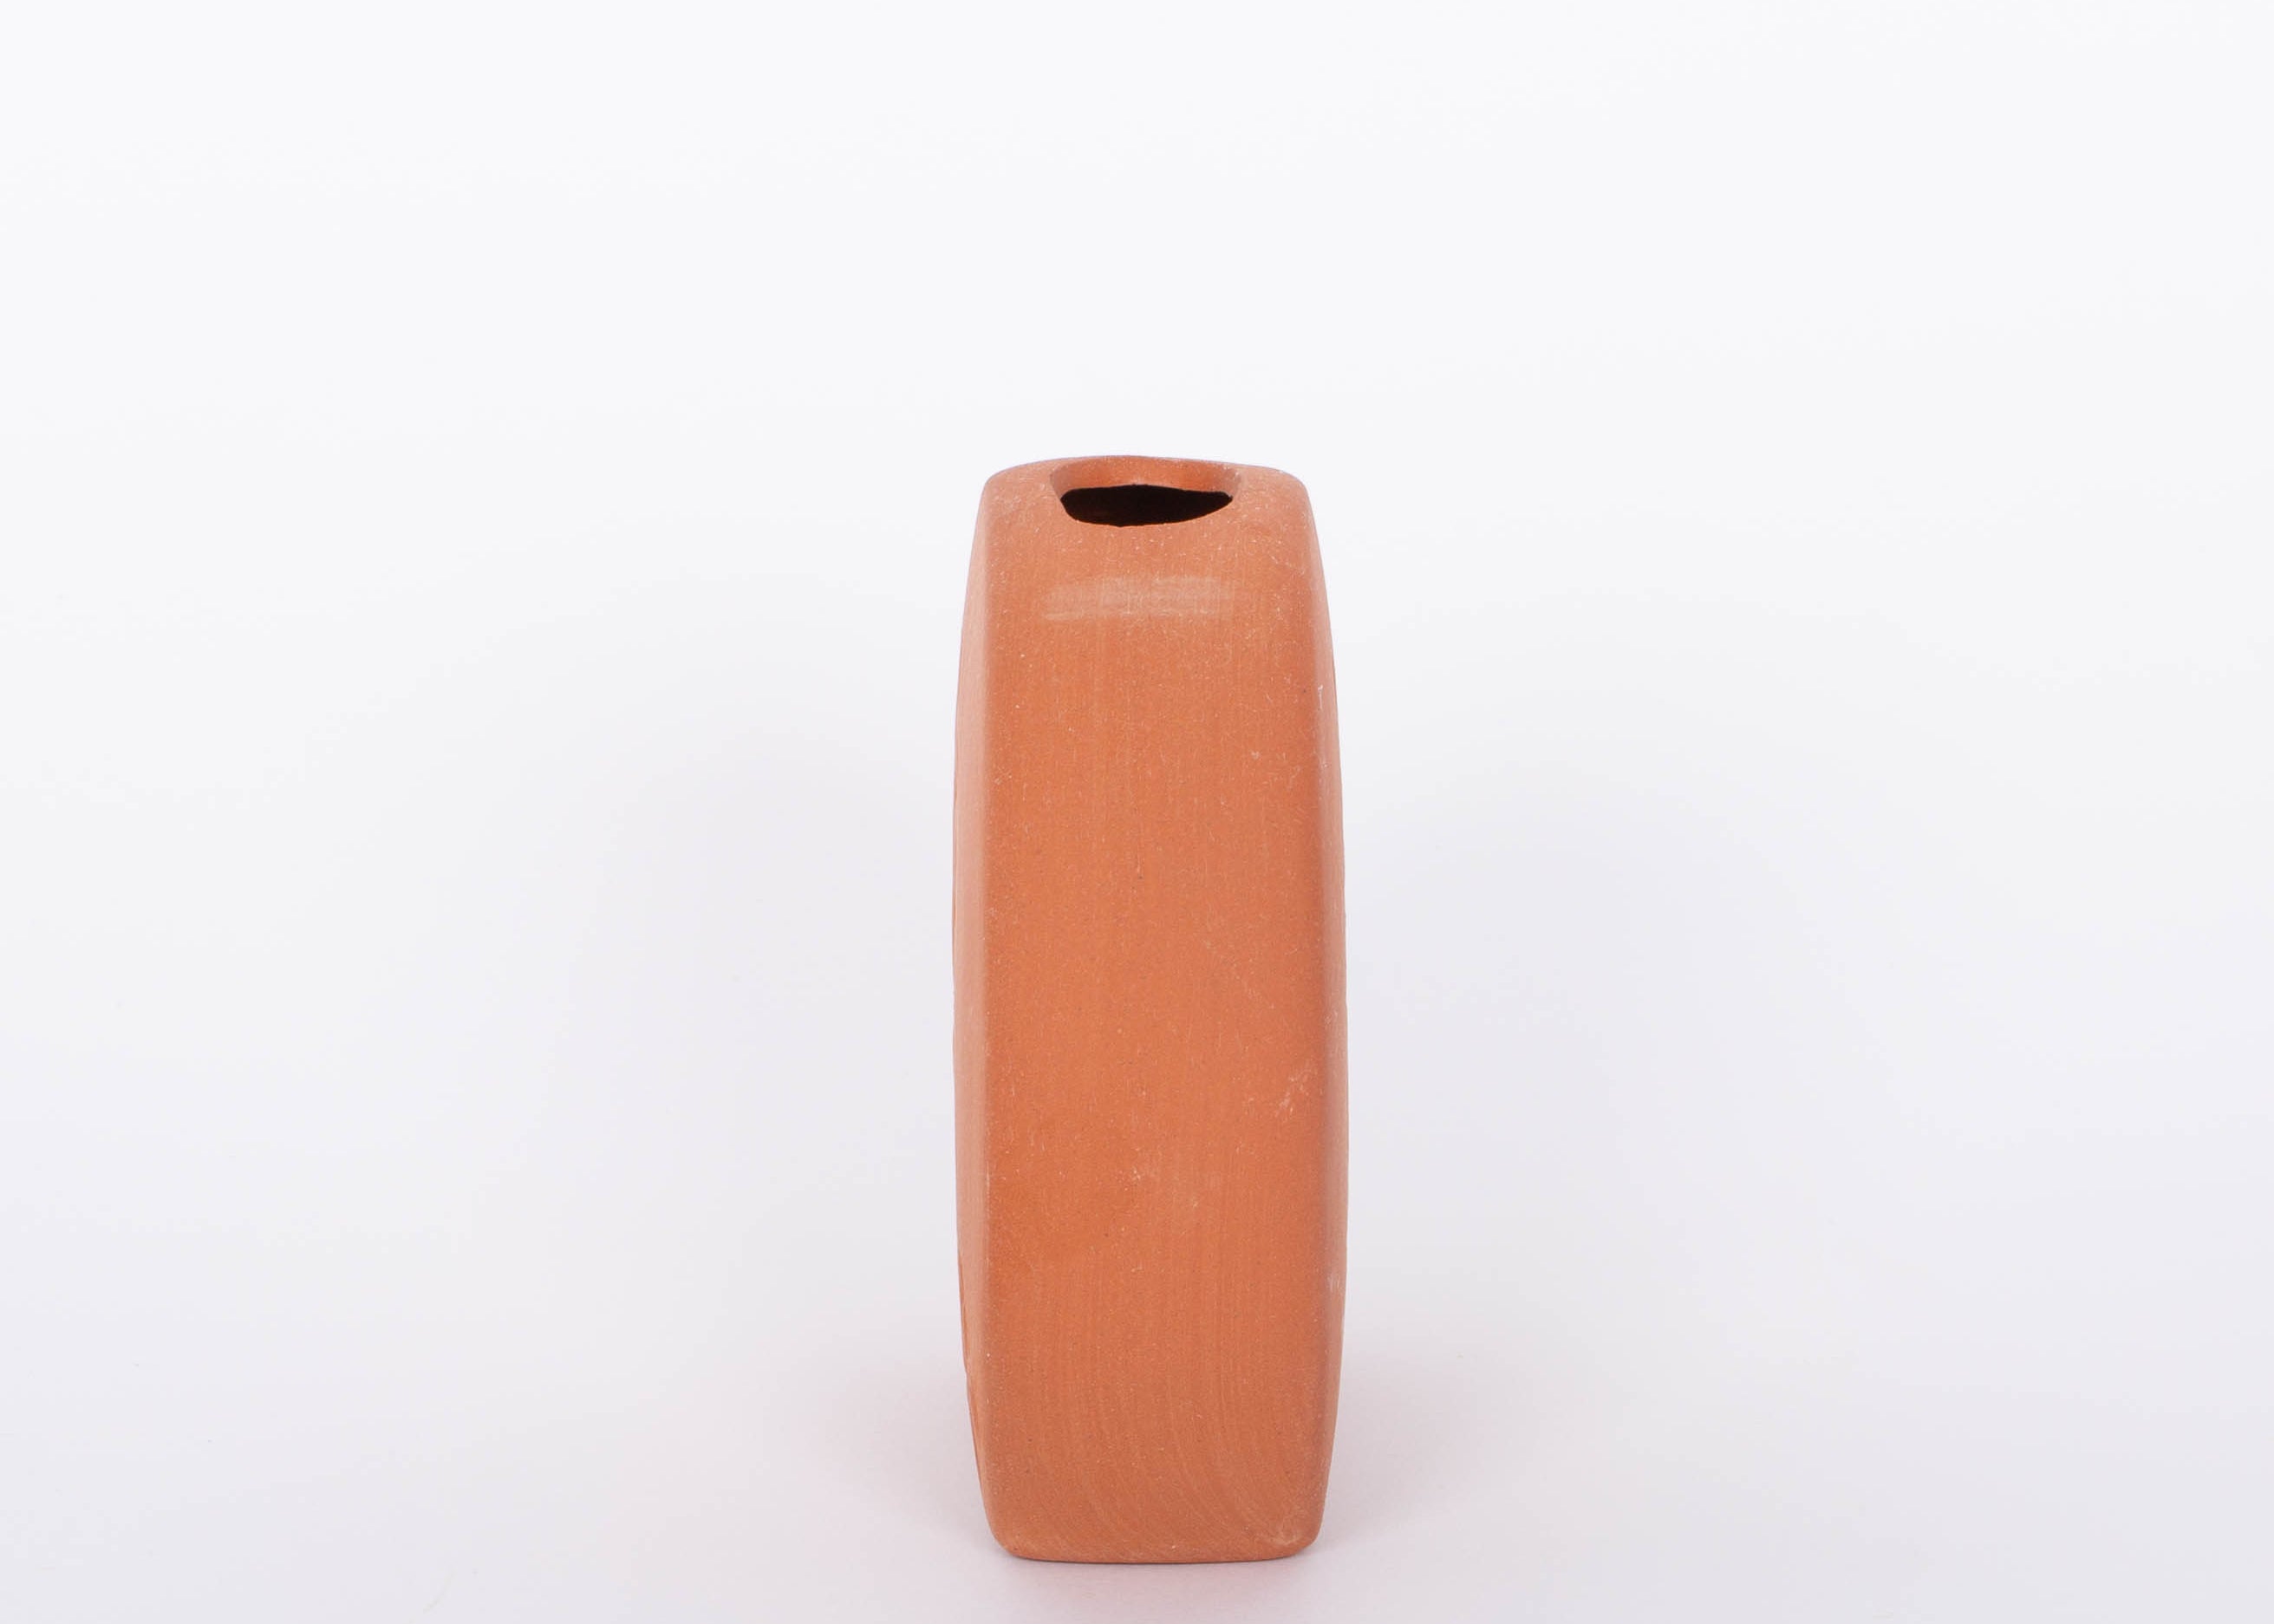 Short round Poppy Budvase in terracotta geometric silhouette with imprint of live plant. Side view. White background.